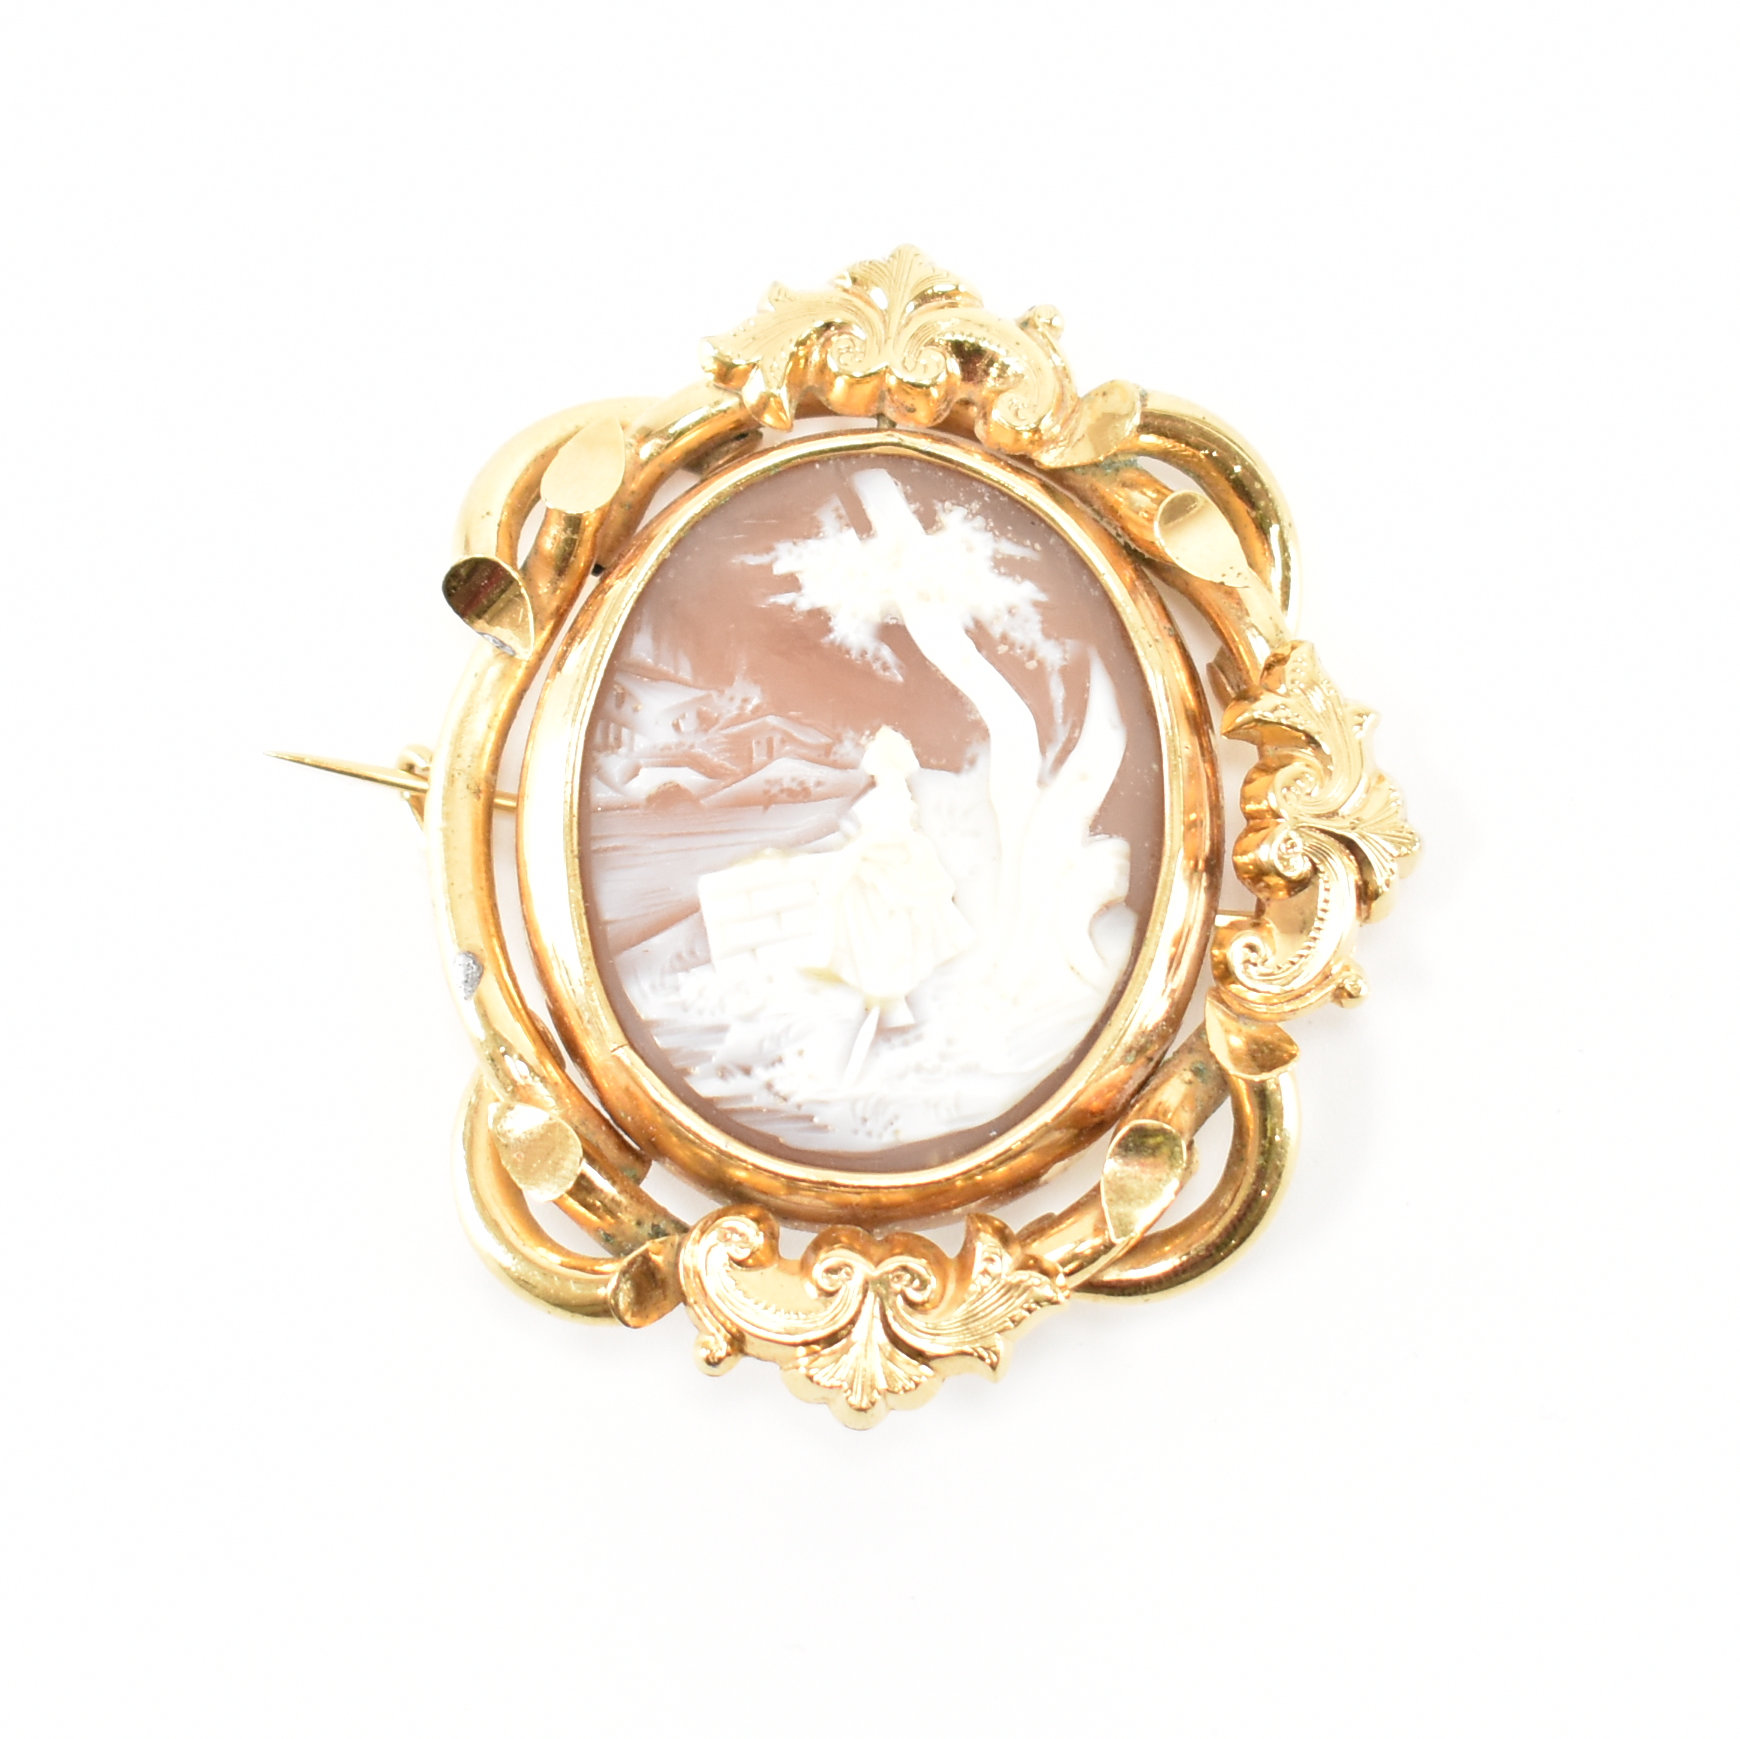 ANTIQUE GOLD PLATED CARVED SHELL CAMEO BROOCH